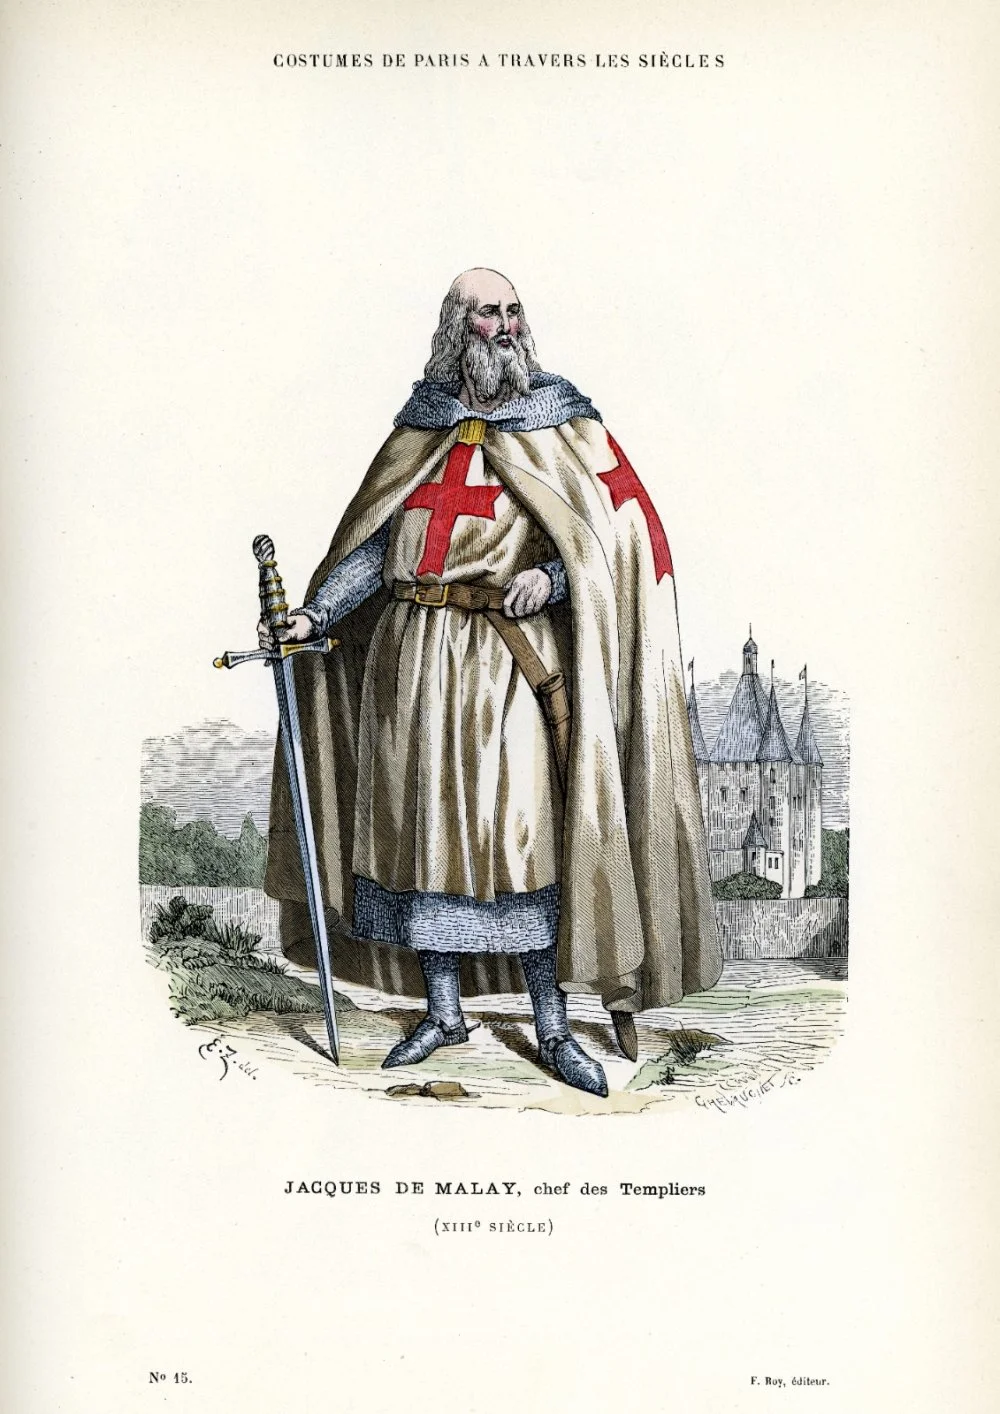 Vintage lithograph of Jacques de Molay/Getty Images